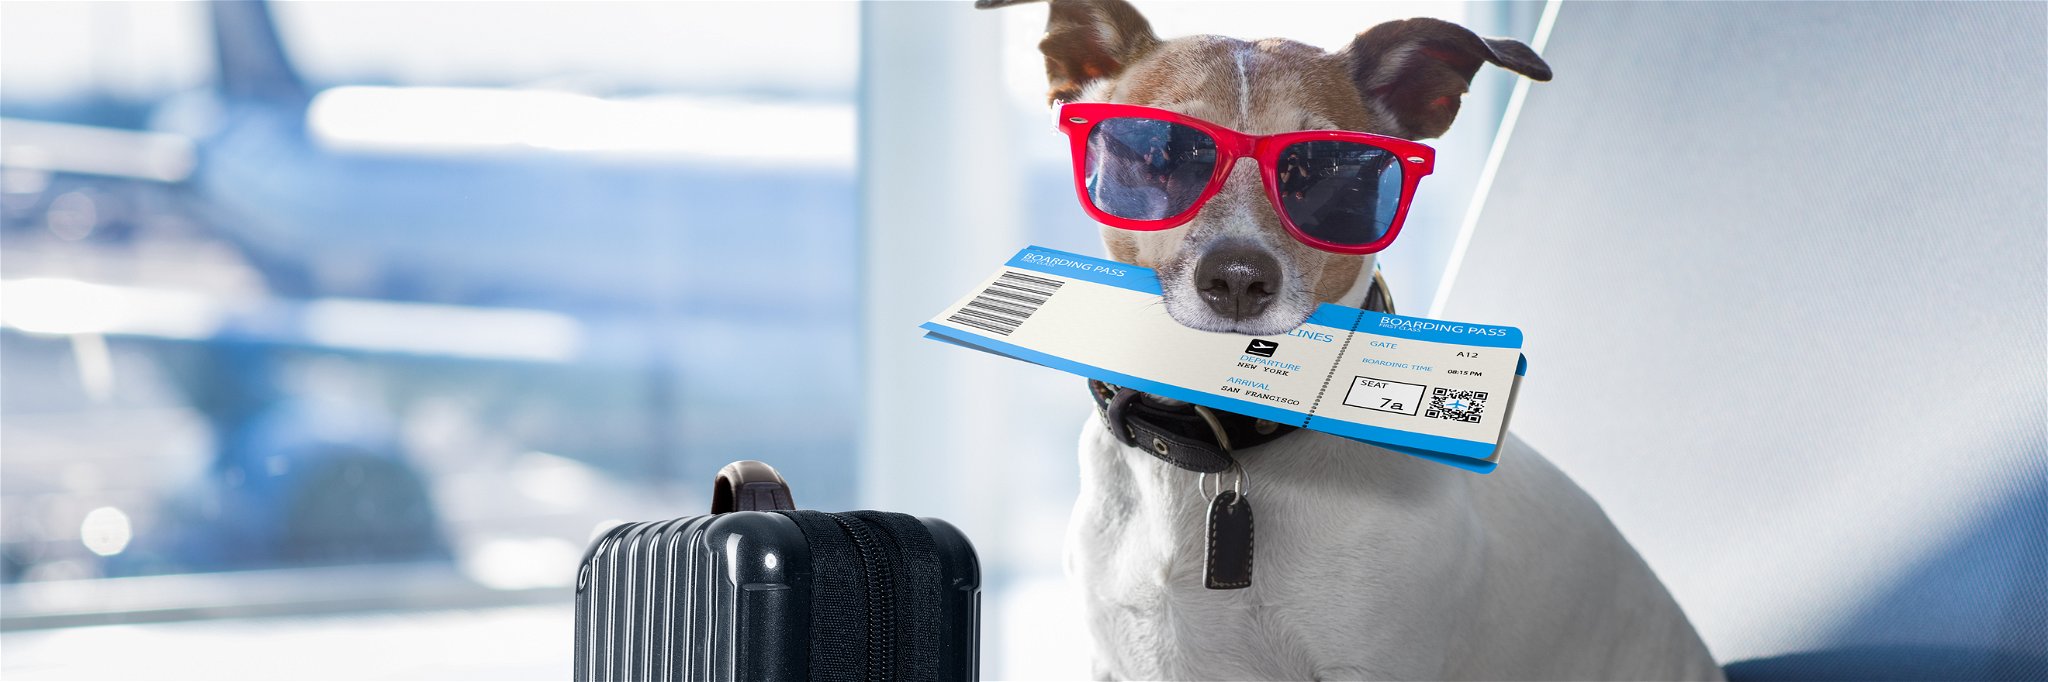 Australian Passengers Could Soon Be Allowed to Take Pets in the Cabin of Planes